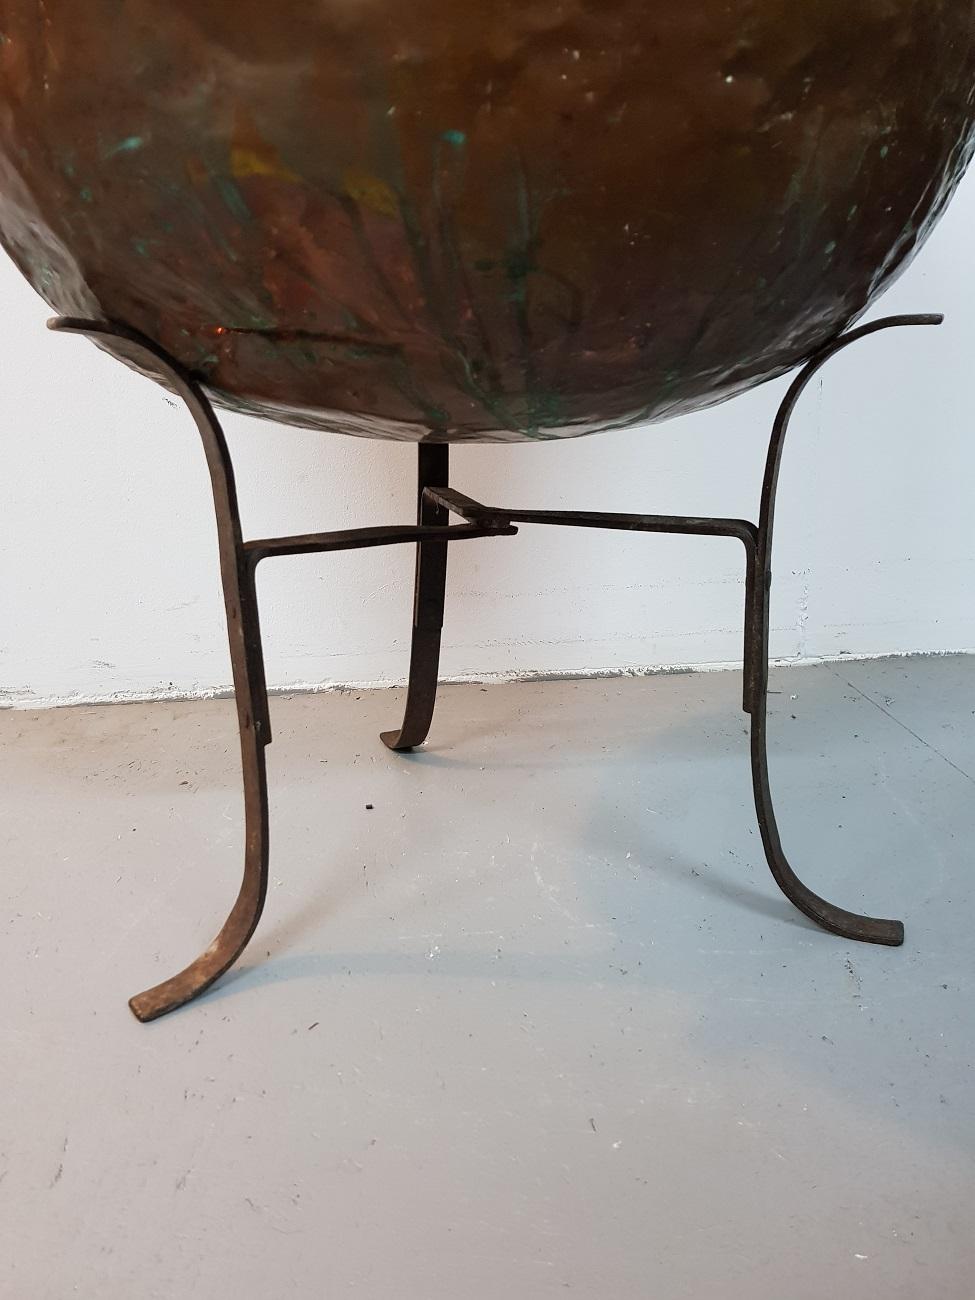 European Late 19th-Early 20th Century Large Copper Bin on Wrought Iron Frame